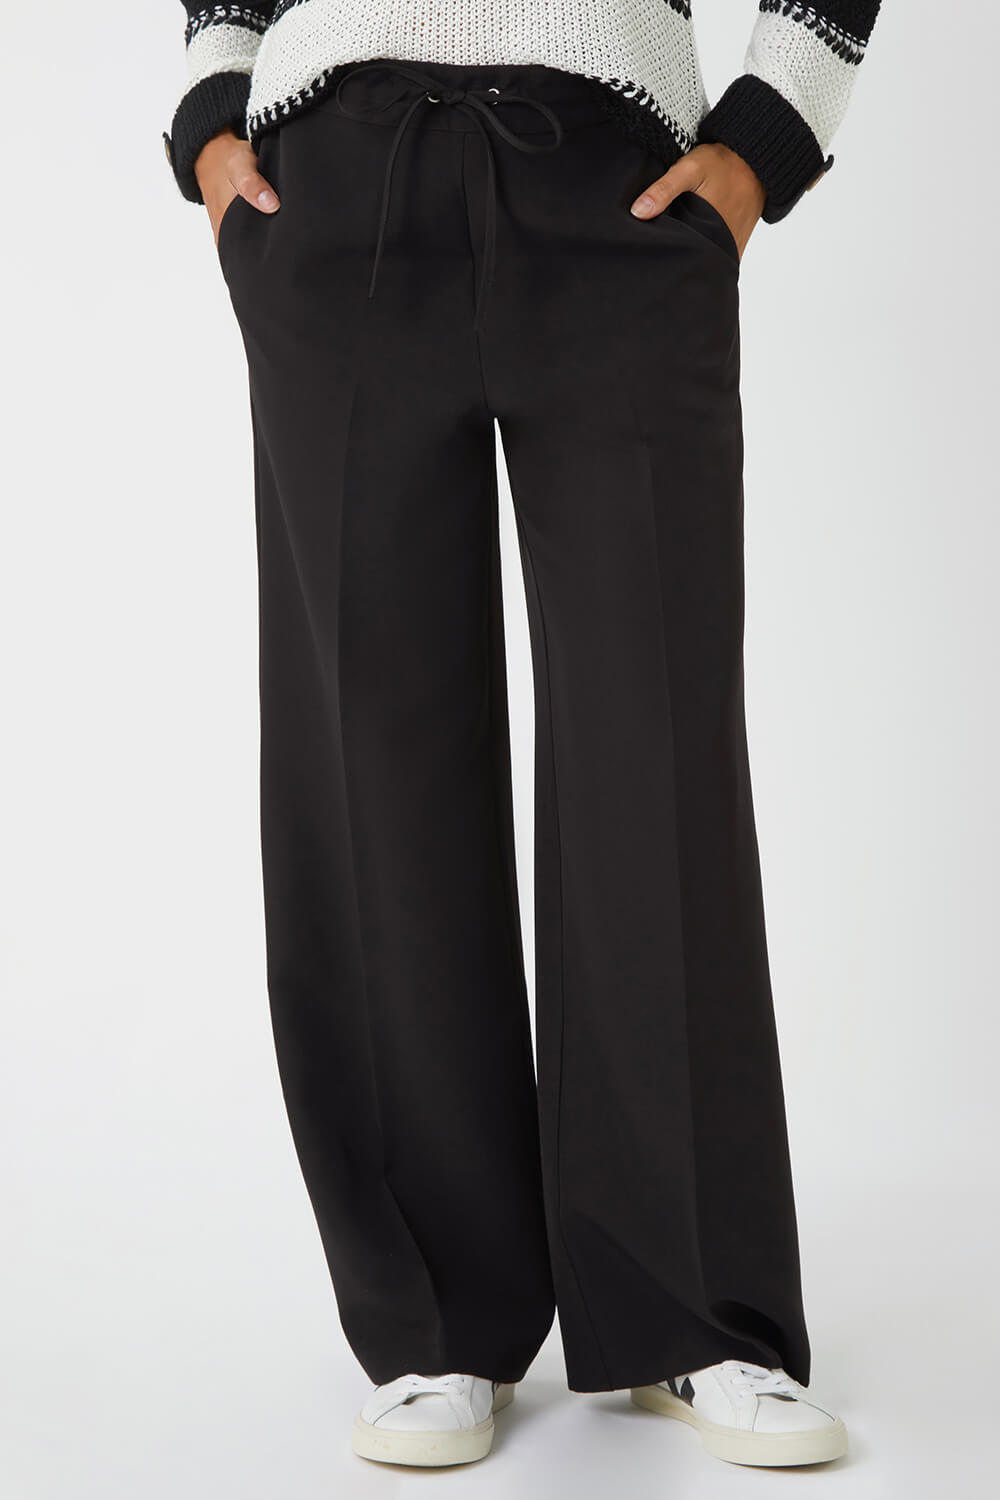 Black Wide Leg Tie Front Stretch Trouser, Image 2 of 5